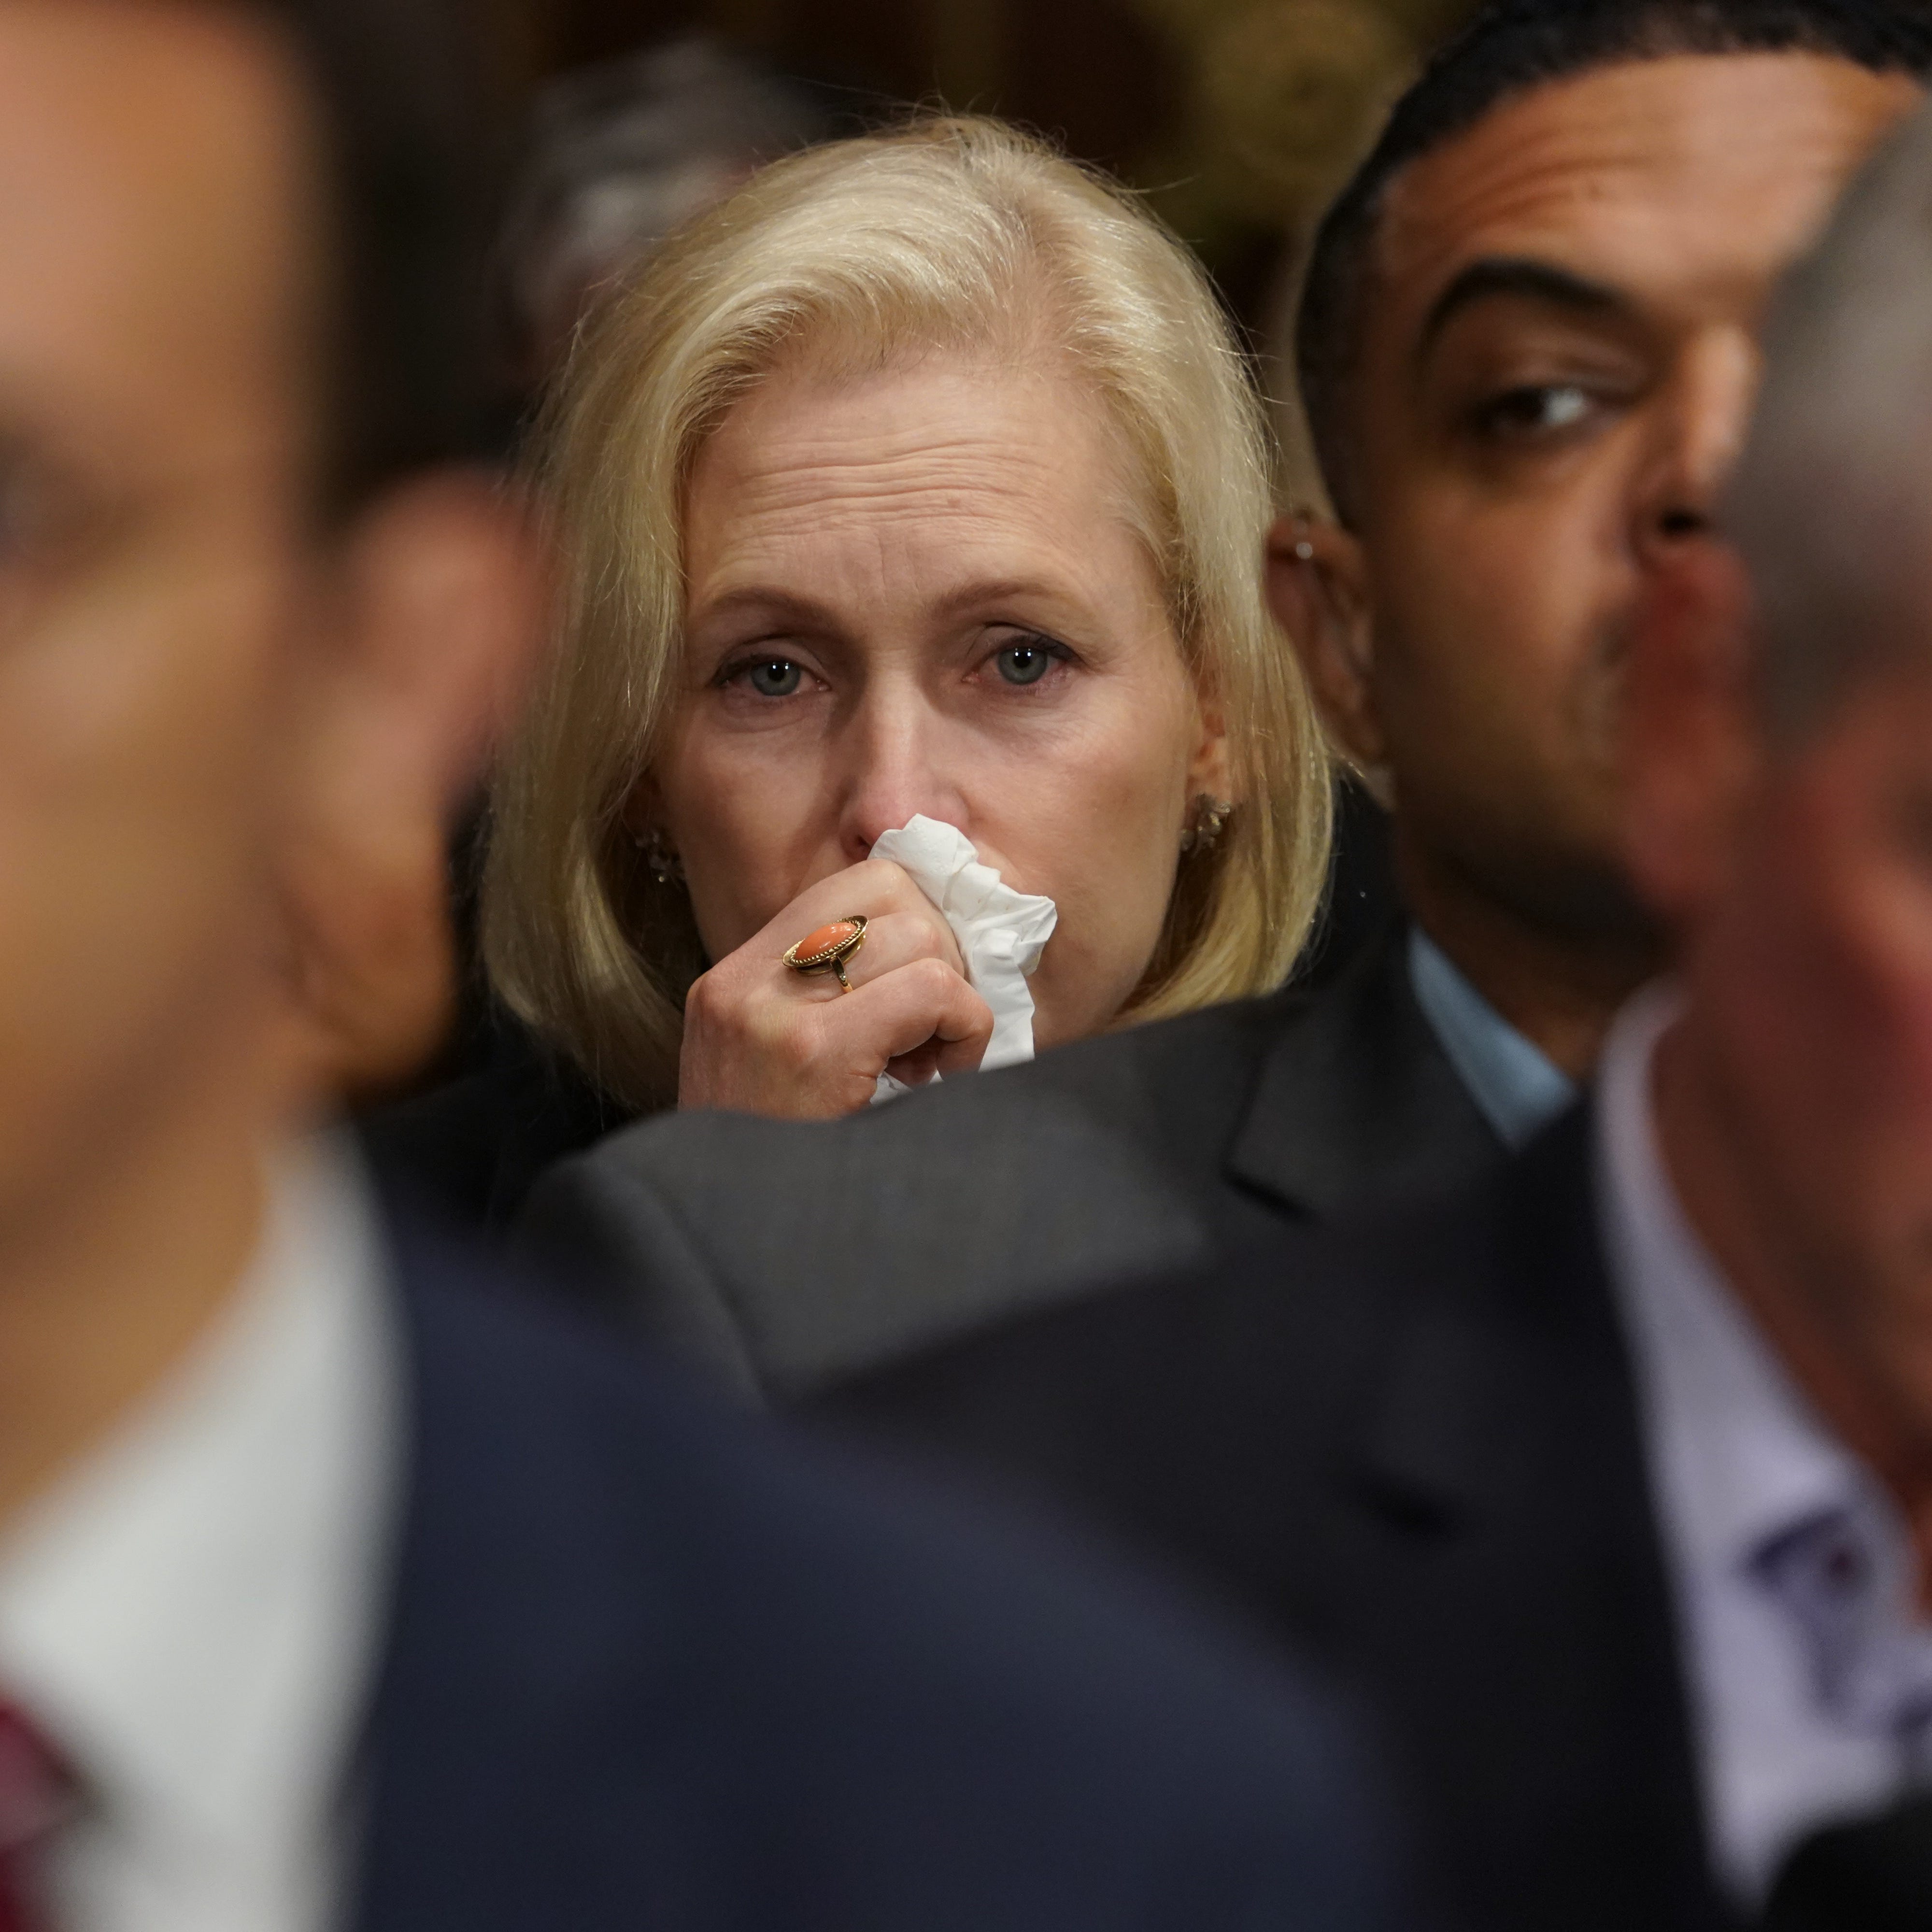 WASHINGTON, DC - SEPTEMBER 27:  U.S. Sen. Kirsten Gillibrand (D-NY) reacts during testimony from Christine Blasey Ford at a Judiciary Committee hearing at the Dirksen Senate Office Building on Capitol Hill September 27, 2018 in Washington, DC. Blasey